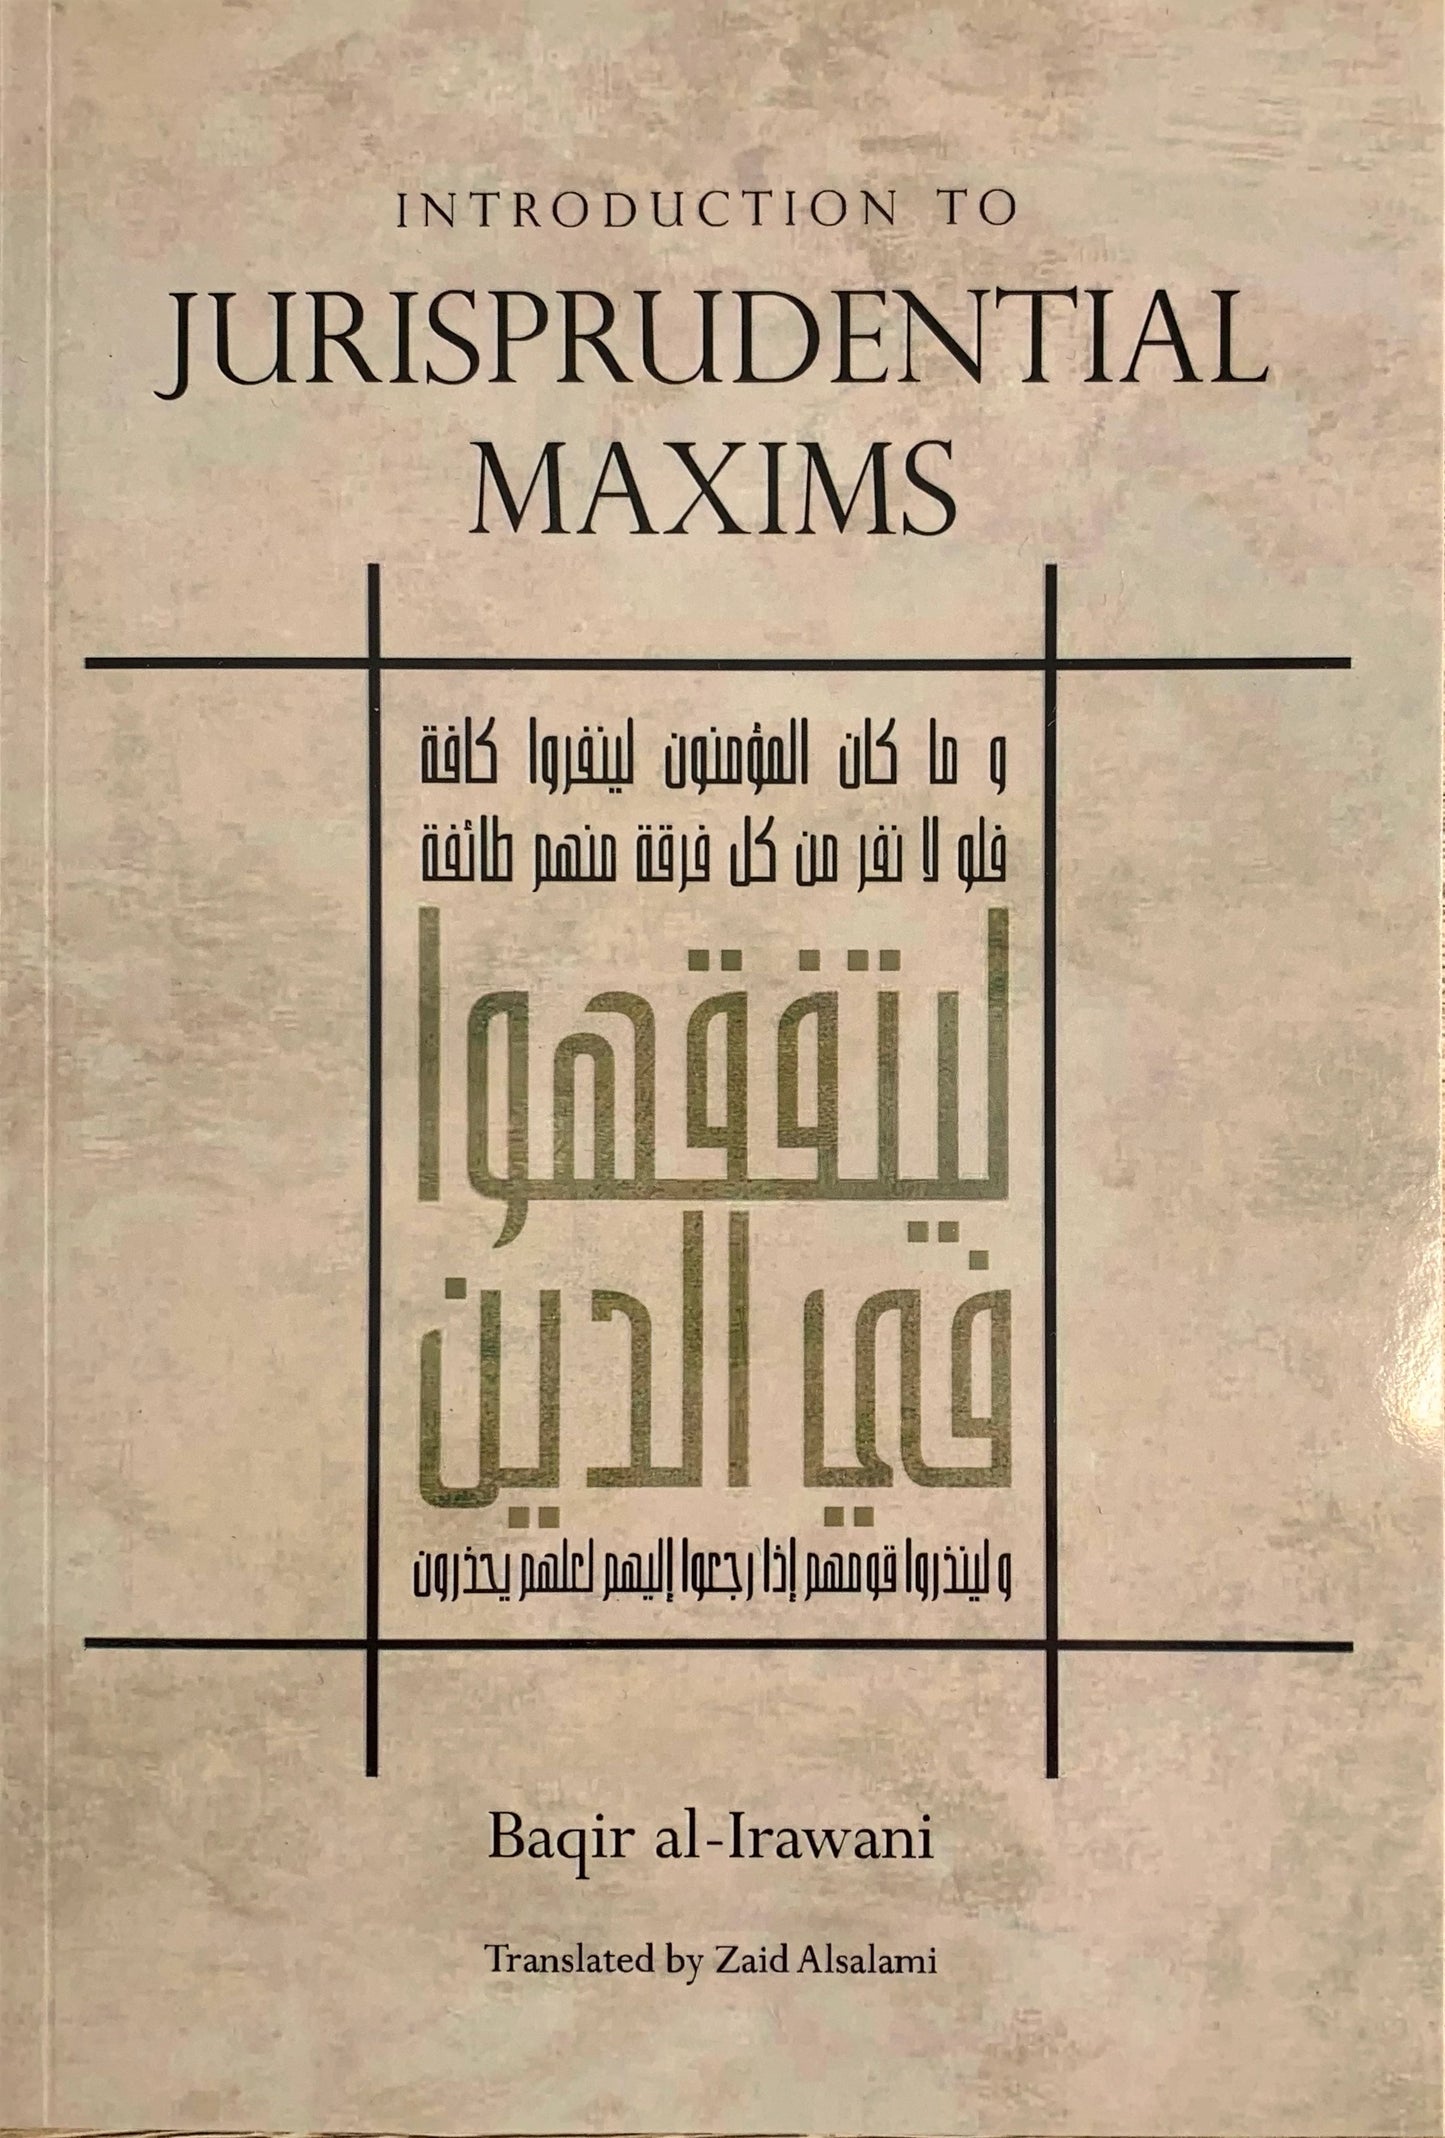 Introduction to Jurisprudential Maxims